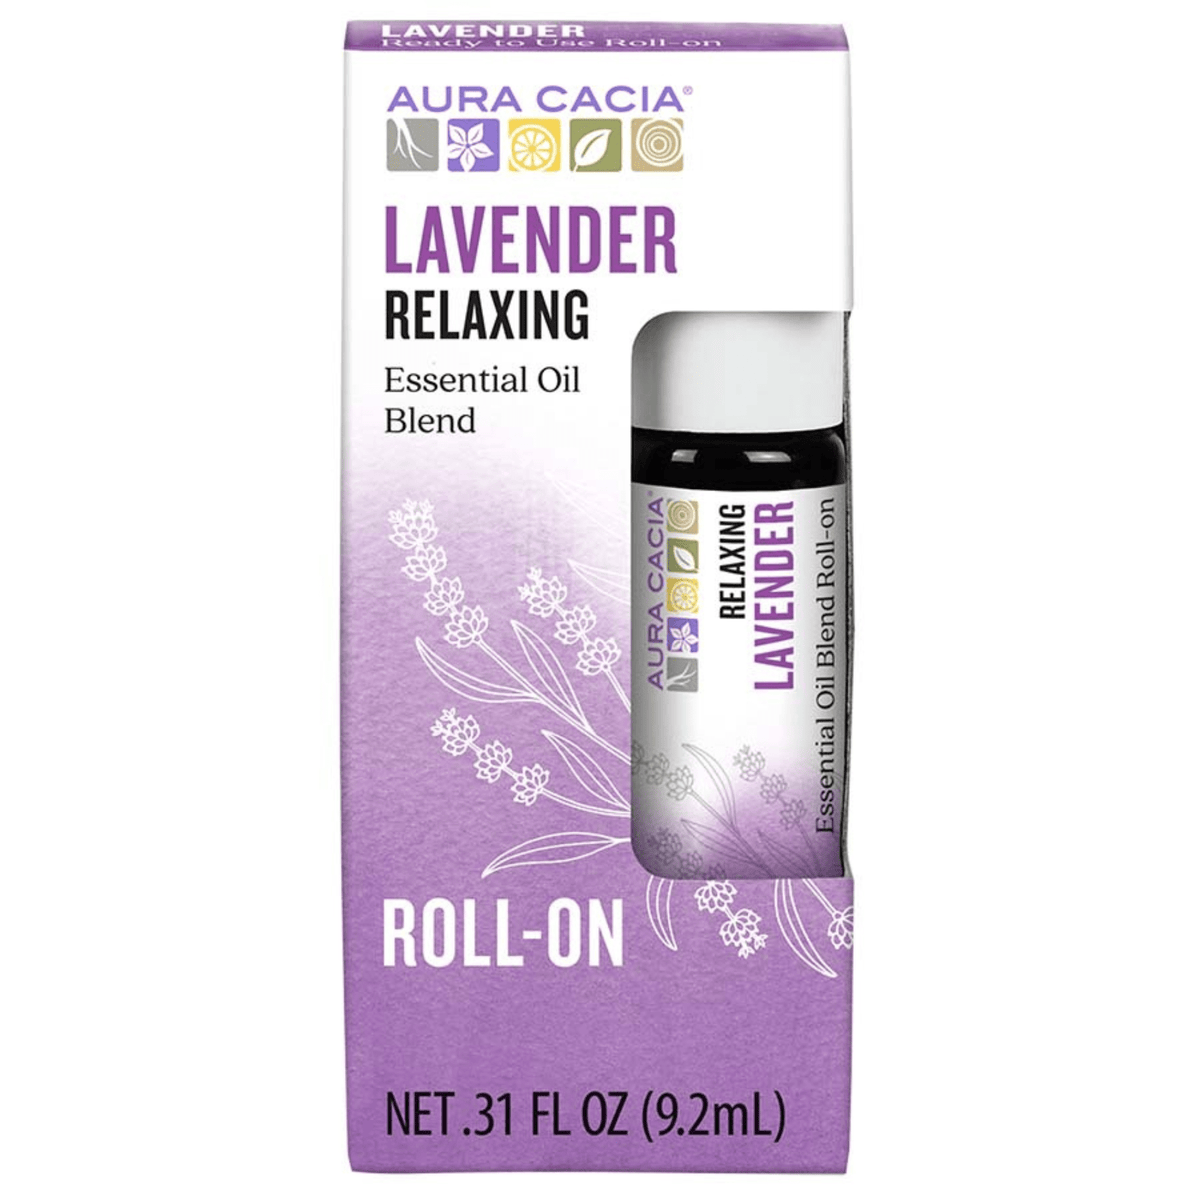 Primary Image of Lavender Relaxing Roll On